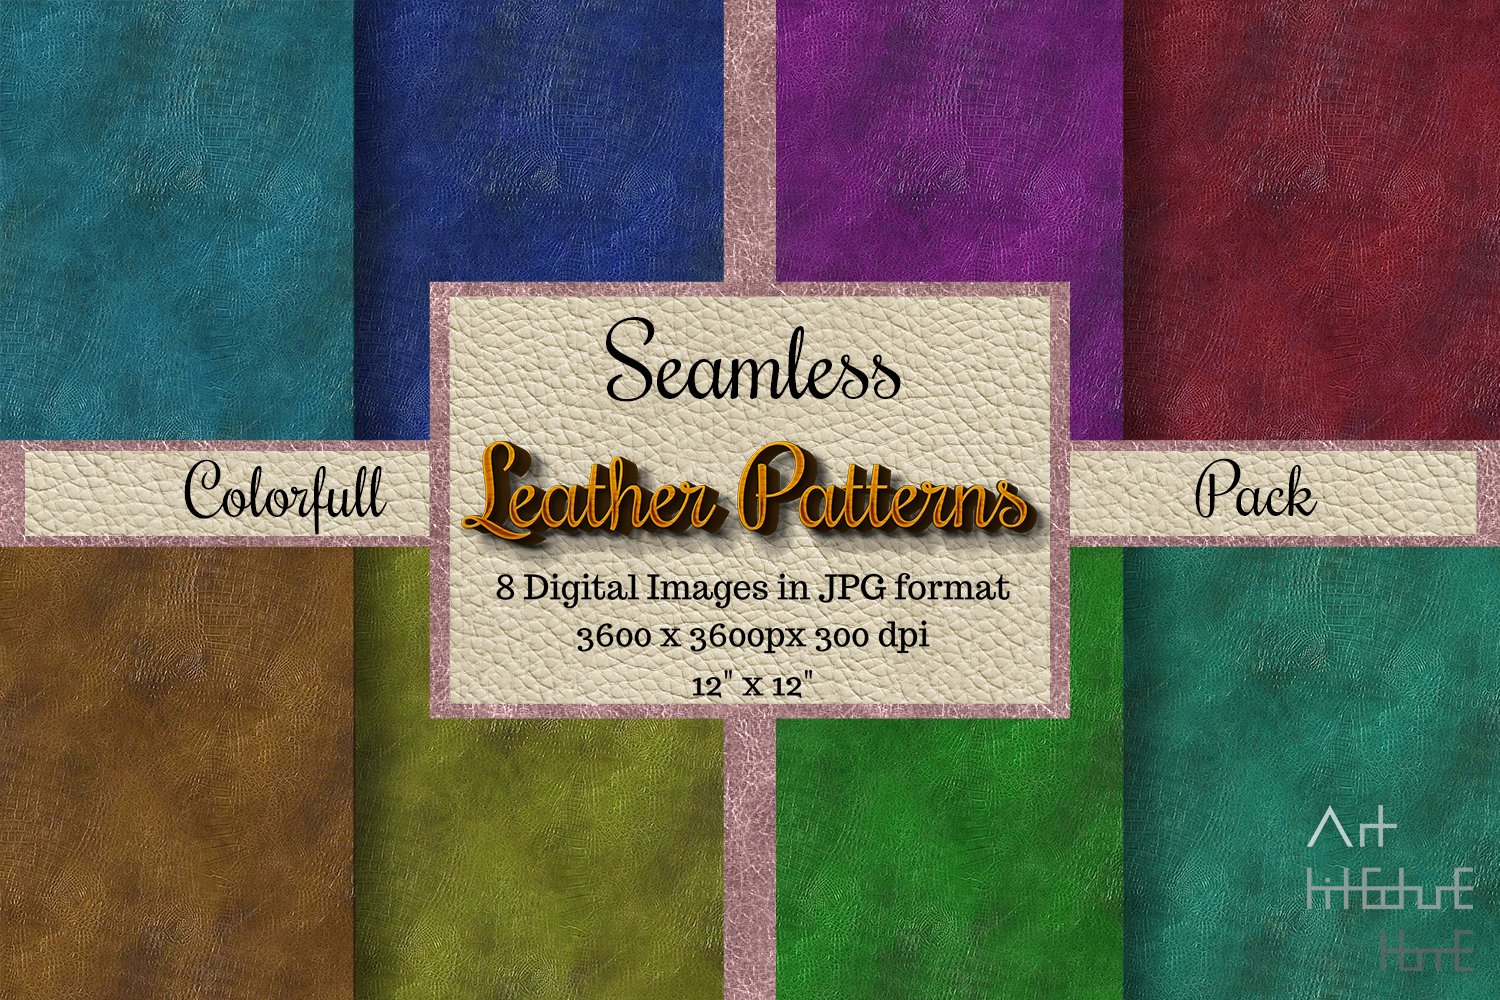 Seamless Leather Patterns Colorful cover image.